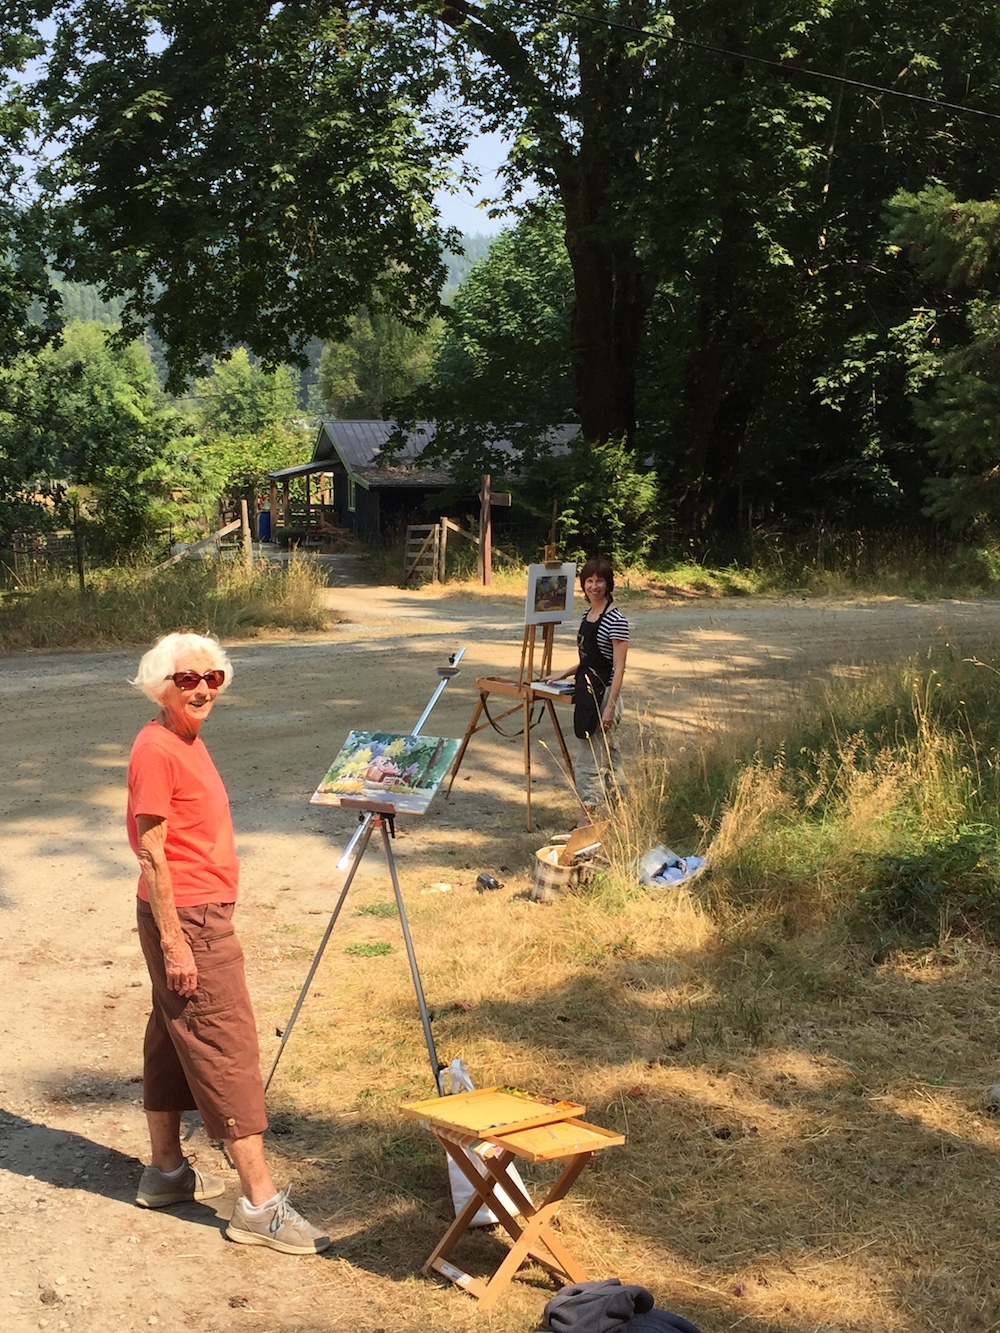 Tweaking a plein air painting in the studio: Dad snapped a photo of me and Mum at work. (Mum was working at watercolour.)